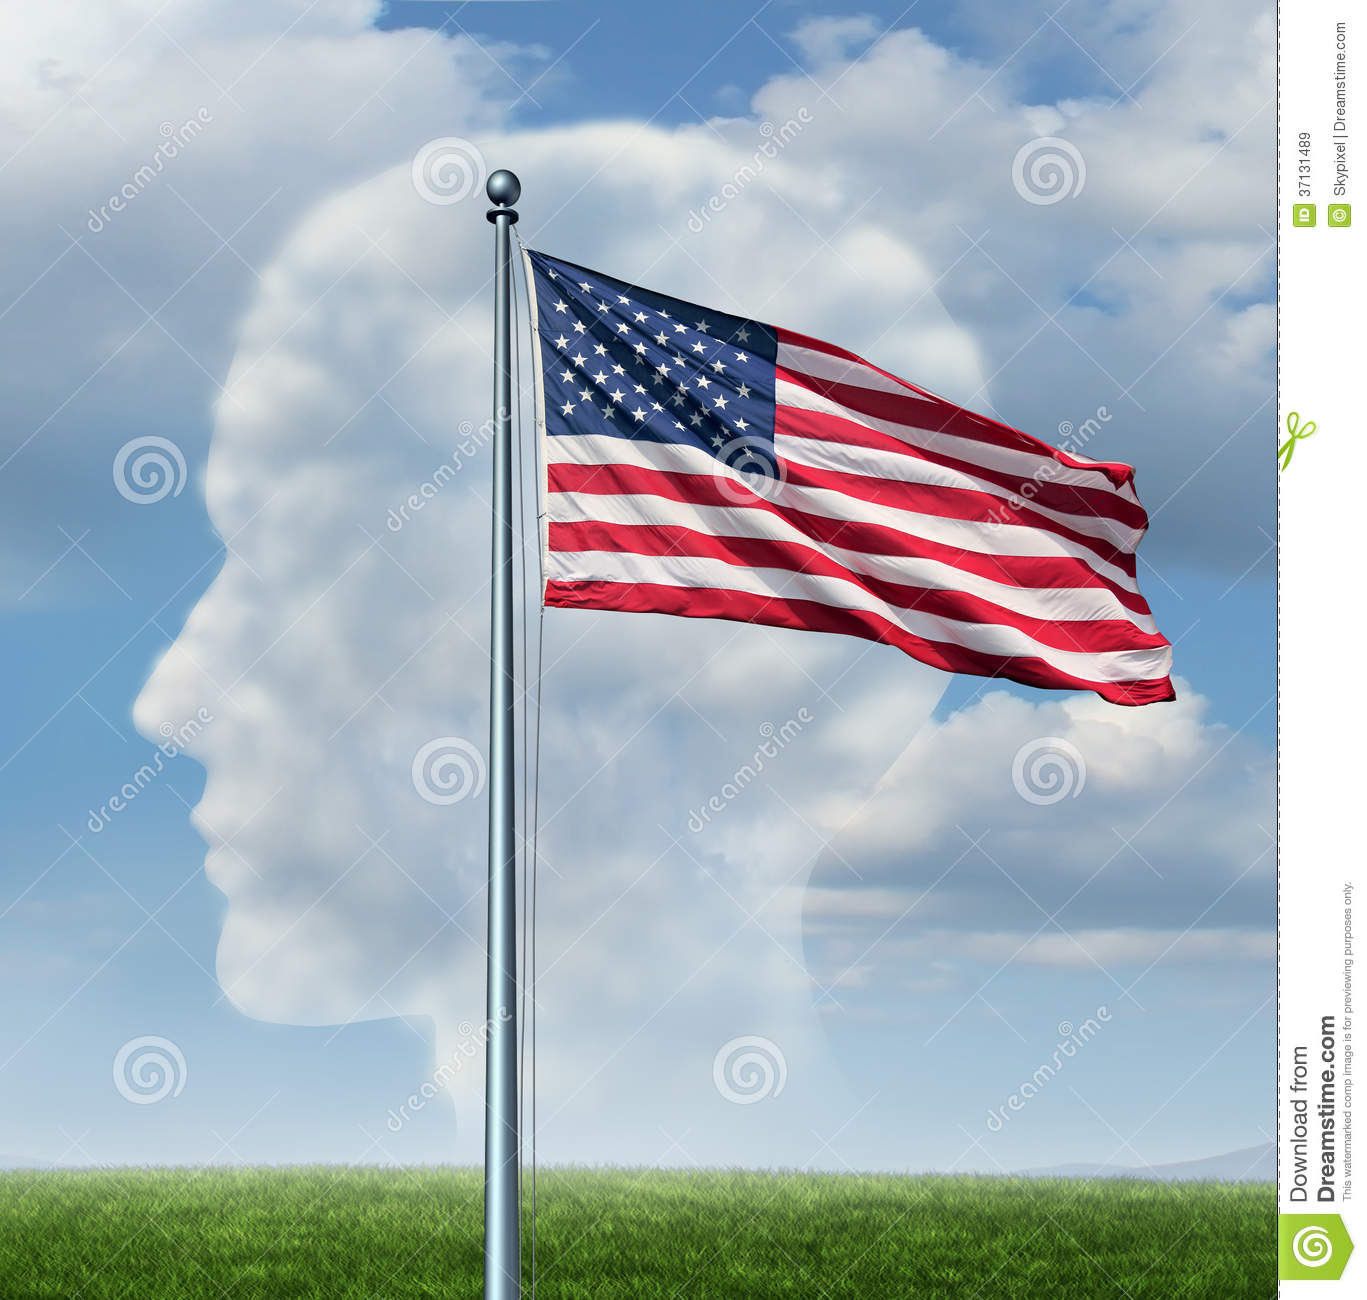 American Citizenship Royalty Free Stock Images   Image  37131489